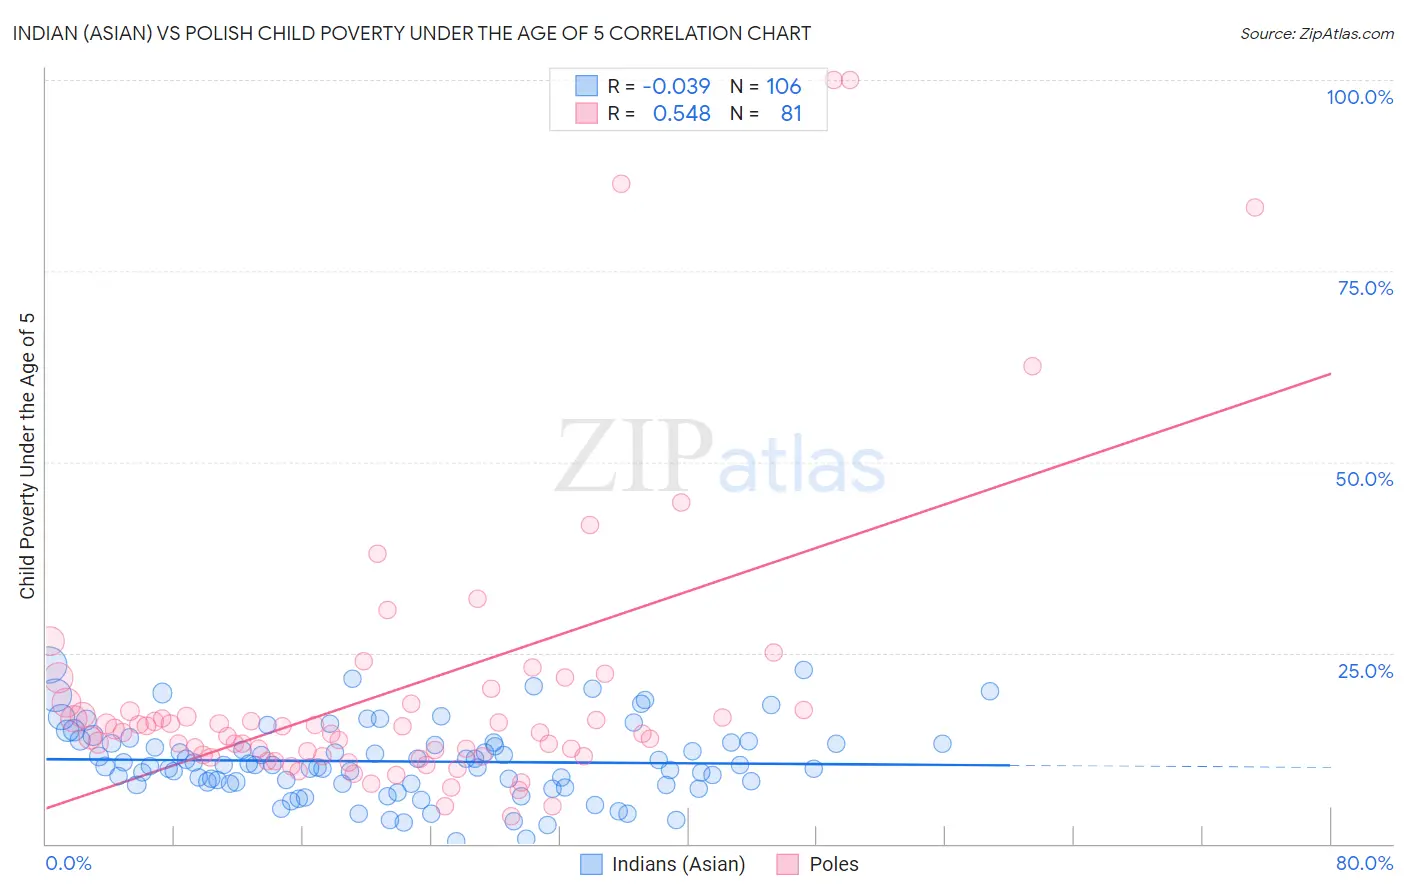 Indian (Asian) vs Polish Child Poverty Under the Age of 5